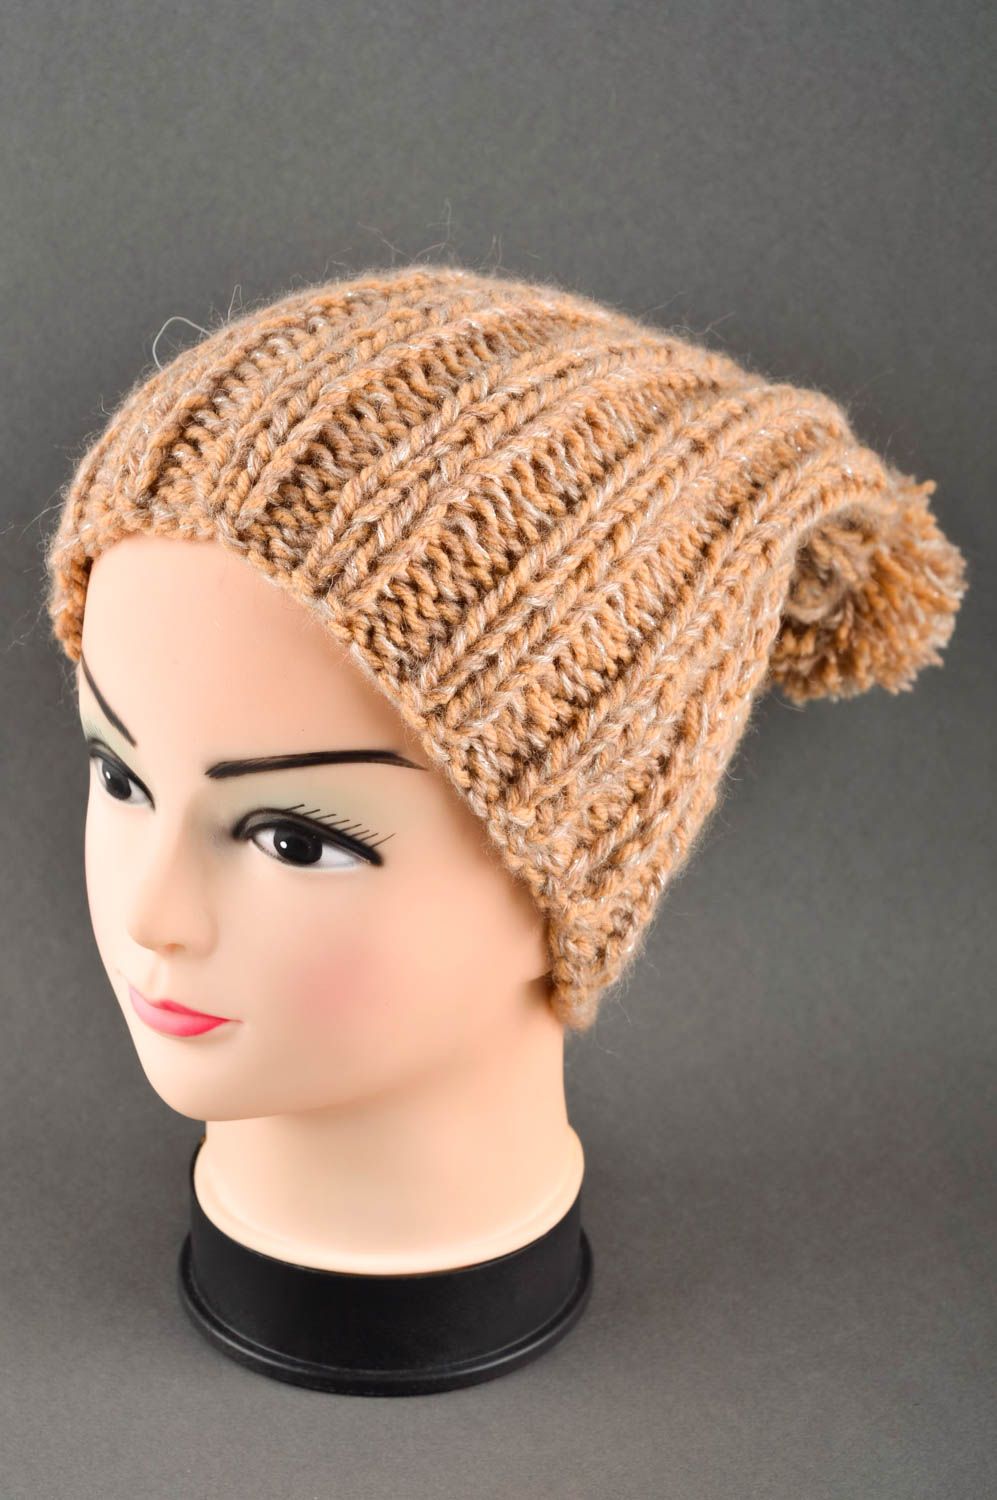 Beautiful handmade knitted hat pompon hat design fashion accessories for girls photo 1